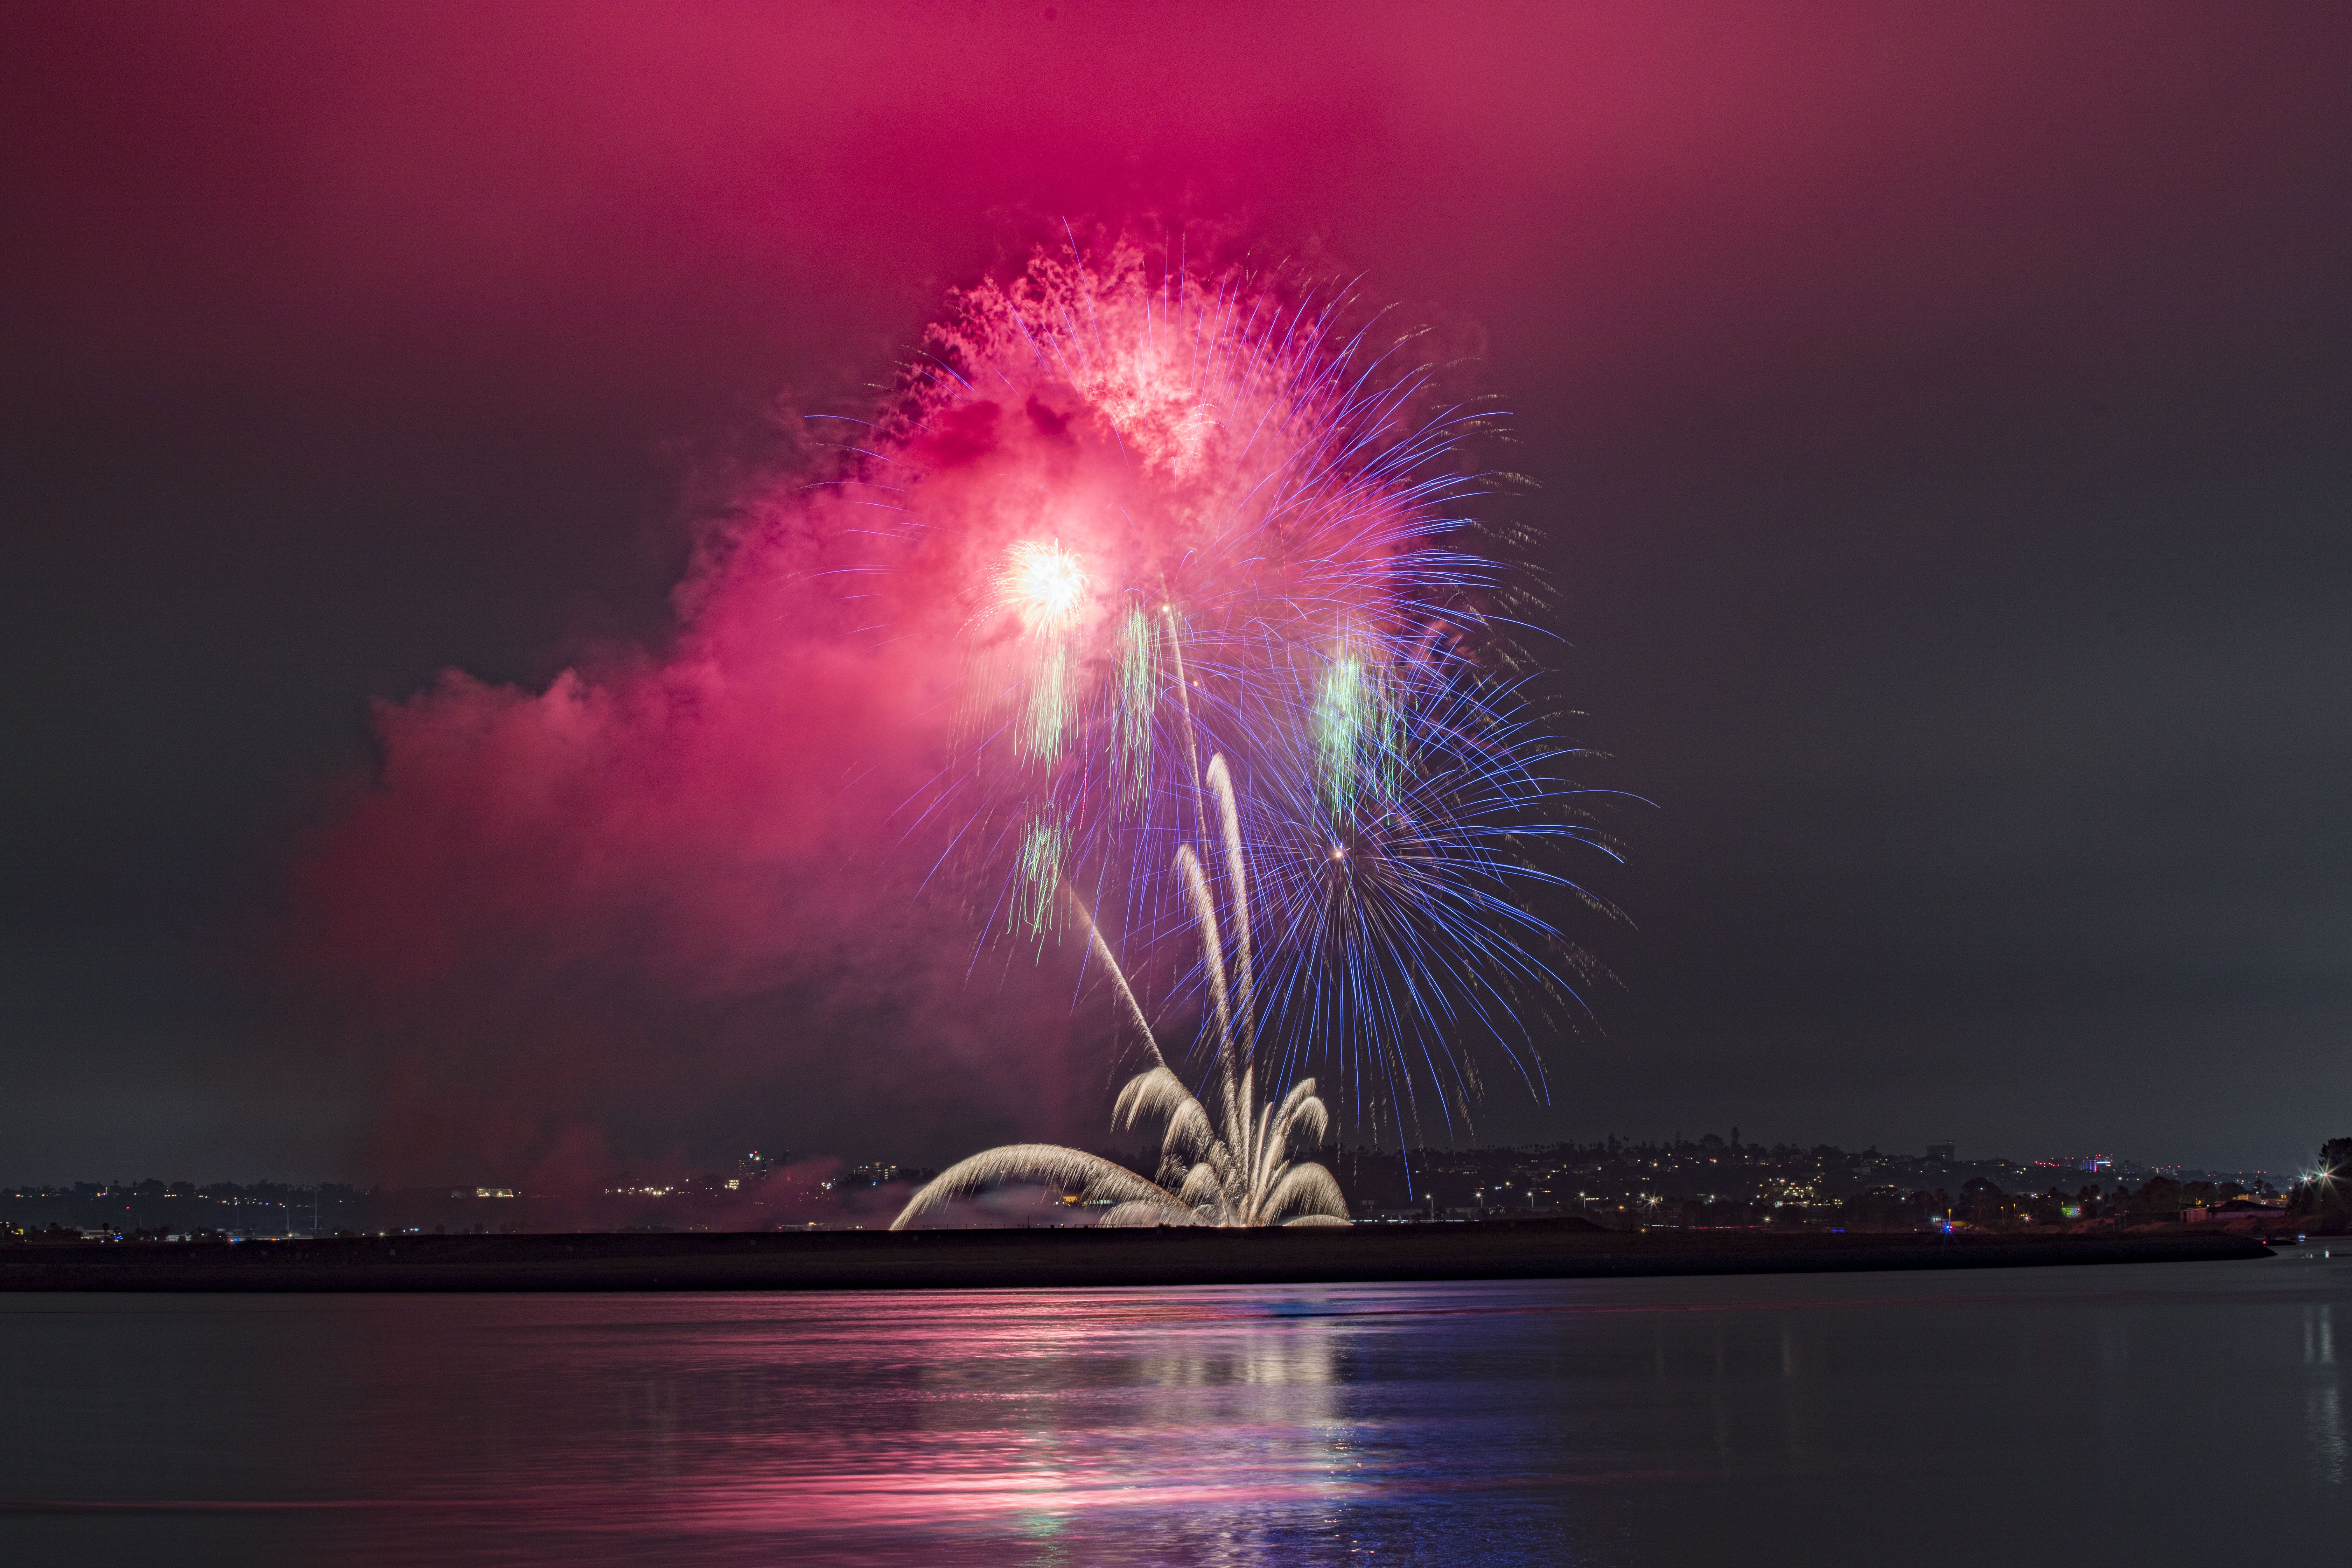 Fireworks explode over Sea World San Diego as part of their Independence Day celebrations on July 03, 2021 in San Diego, California.